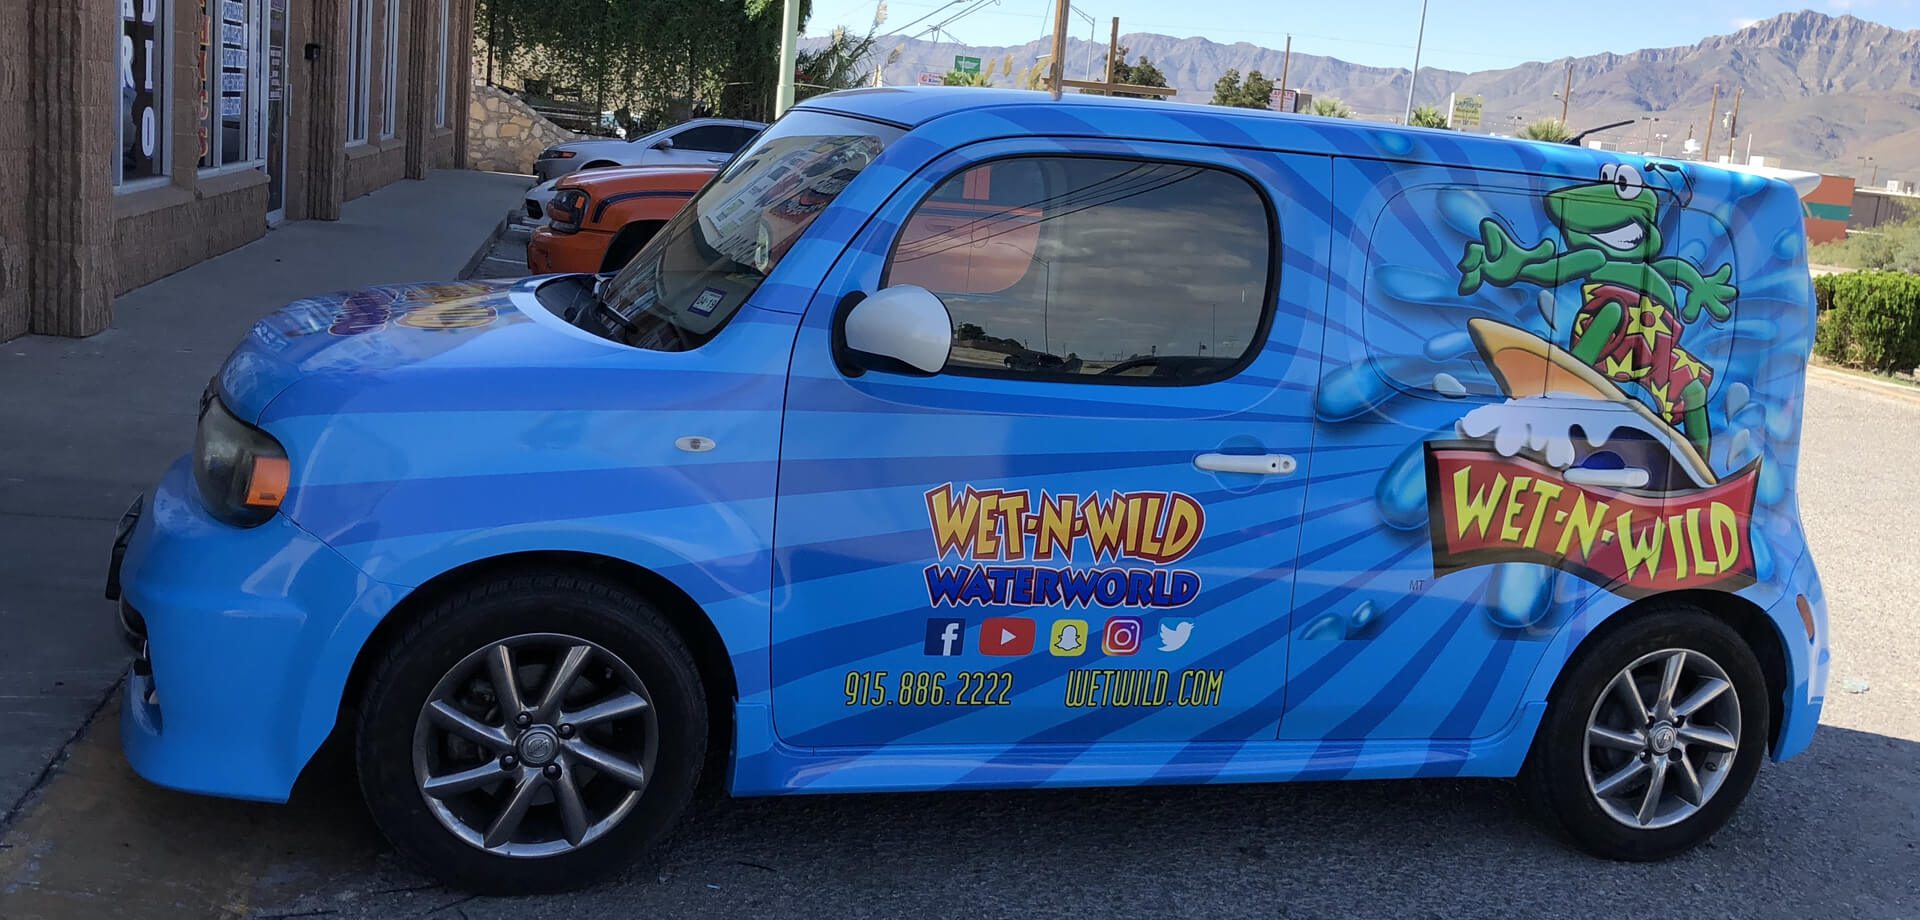 A Car Upgraded in Blue Color and Graphic